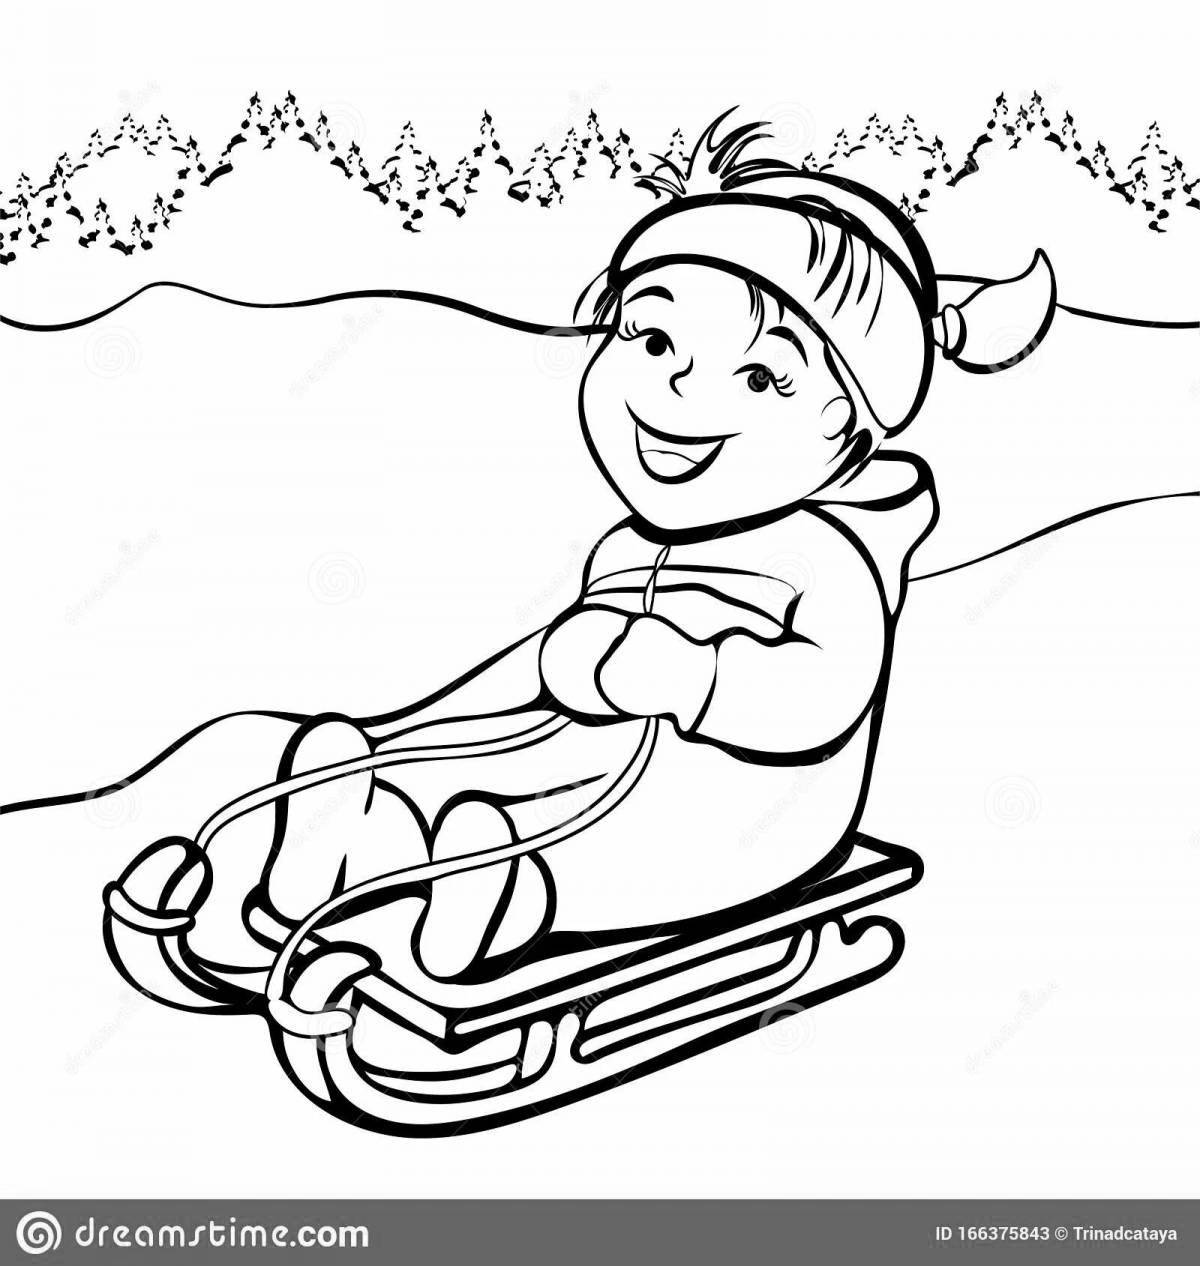 Enthusiastic children sled down the mountain